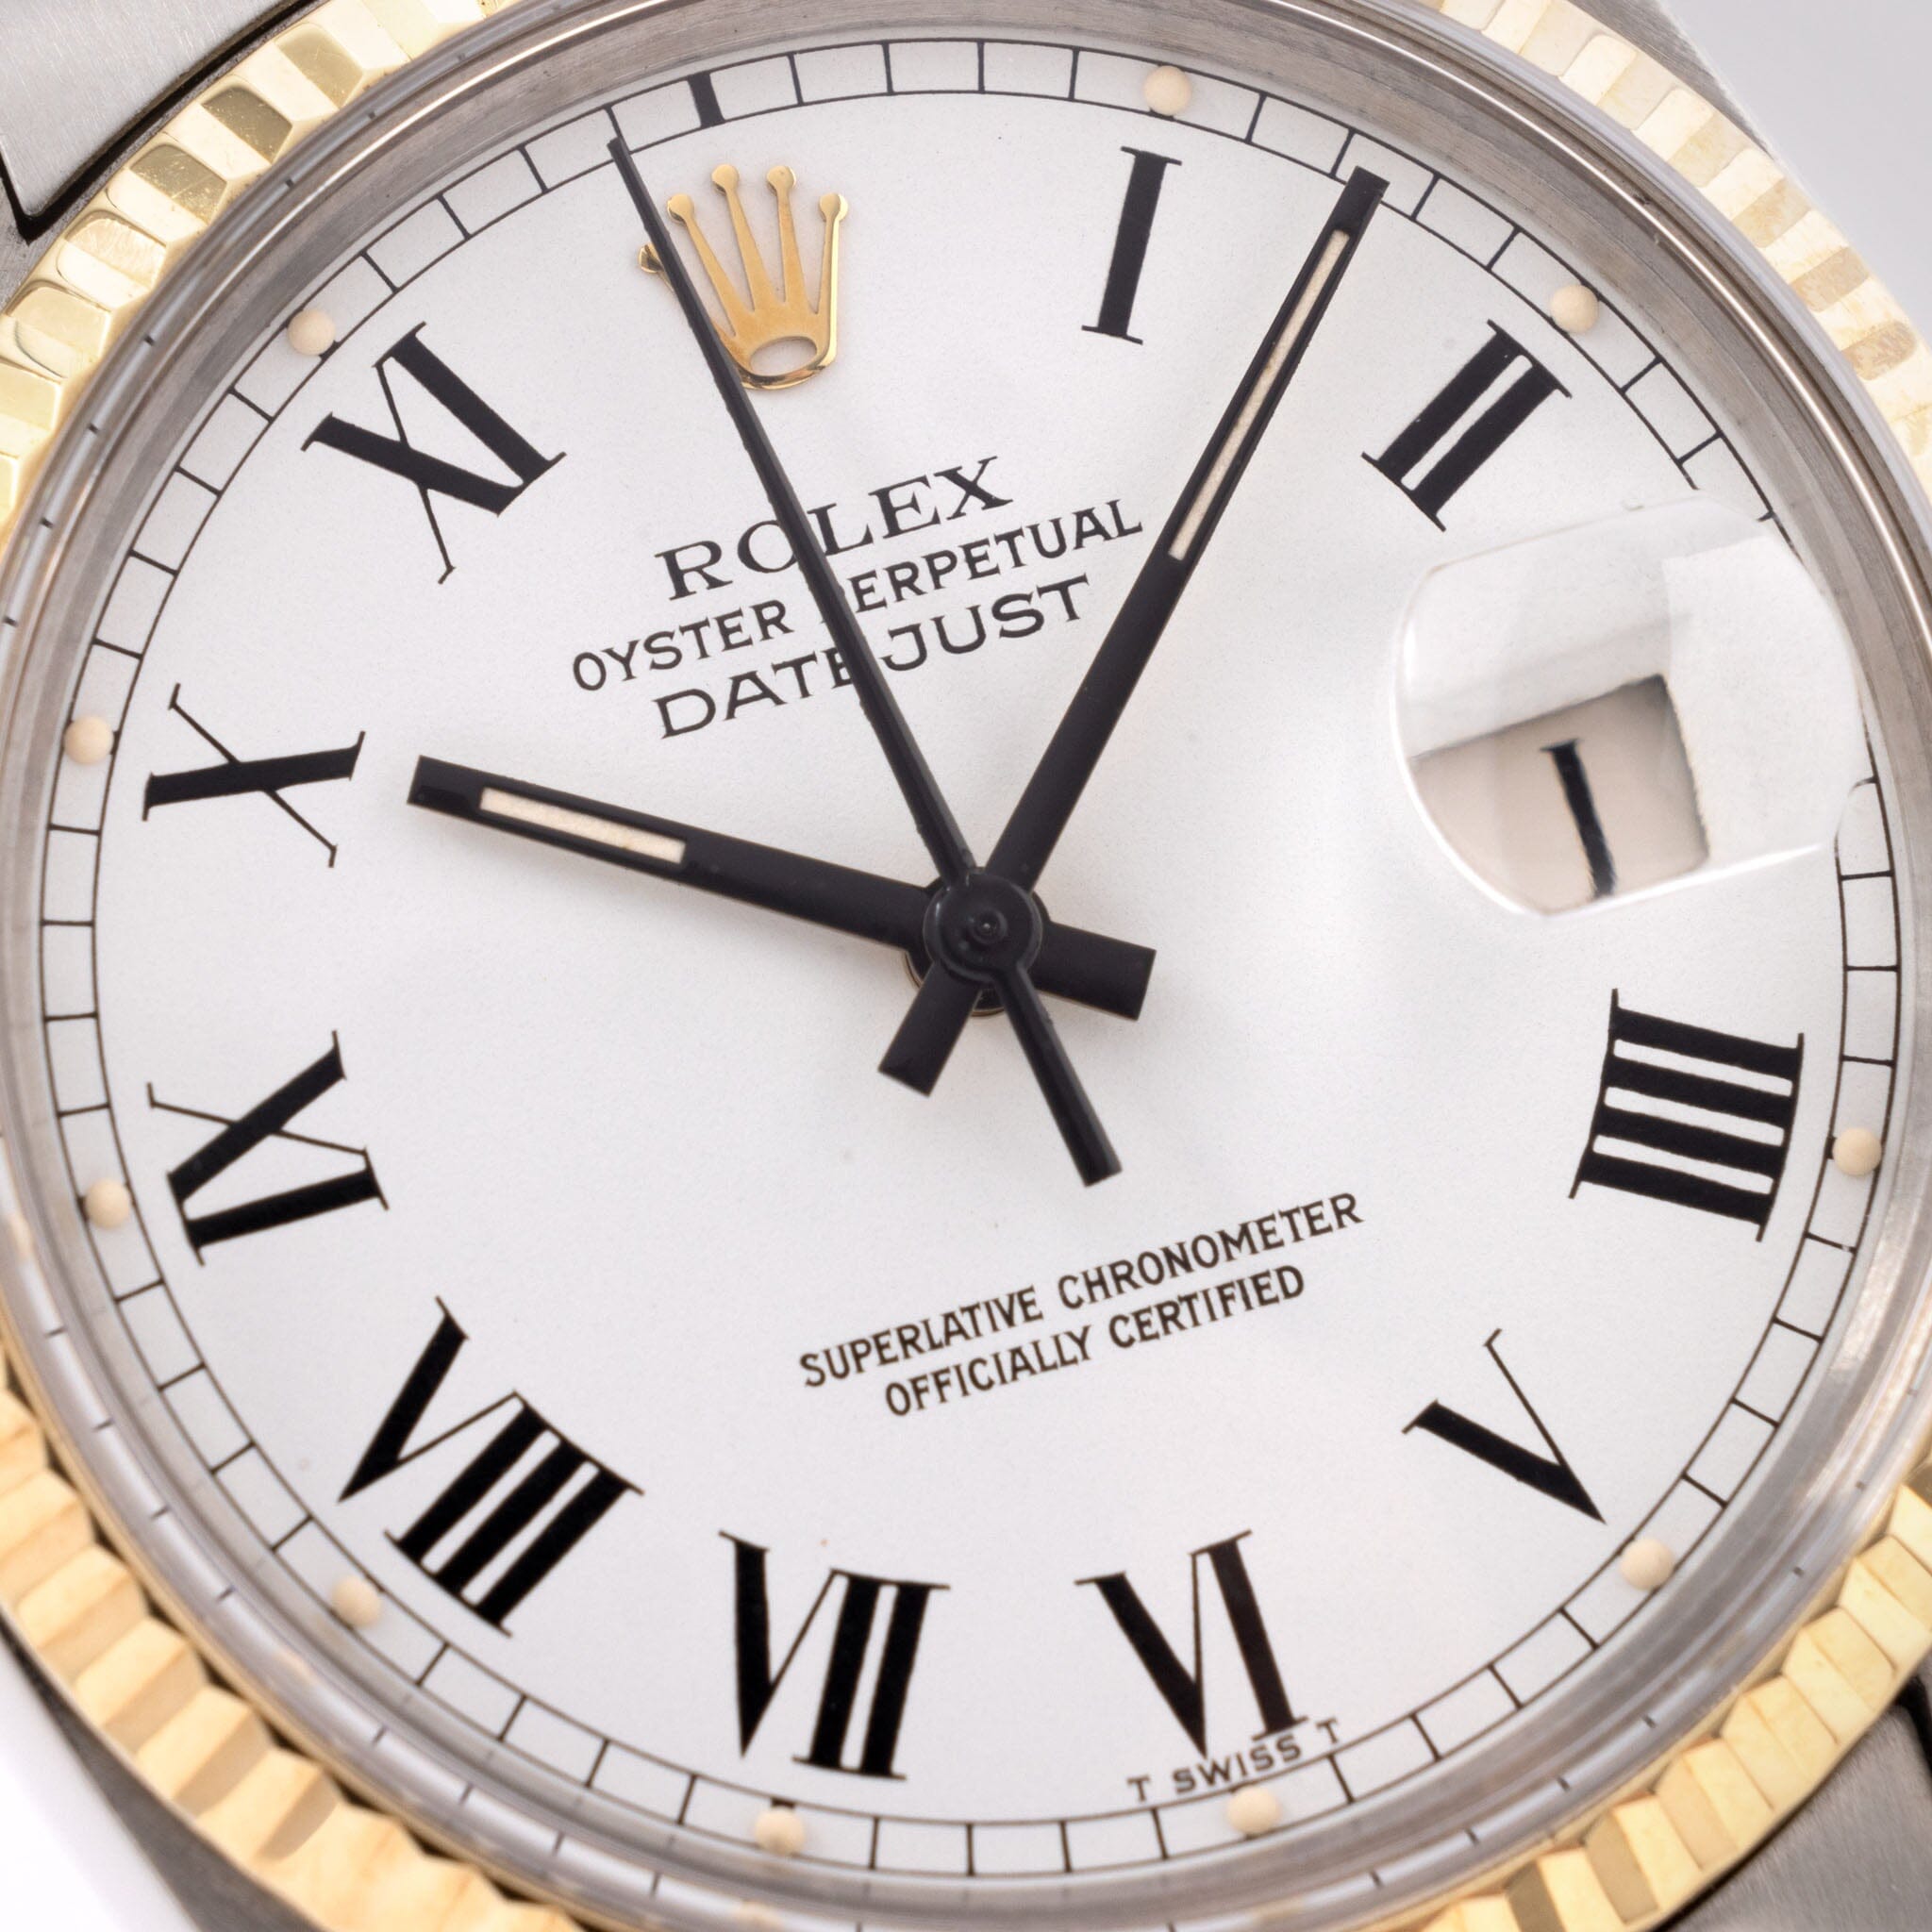 Rolex Datejust Steel and Gold White Buckley Dial Ref 16013